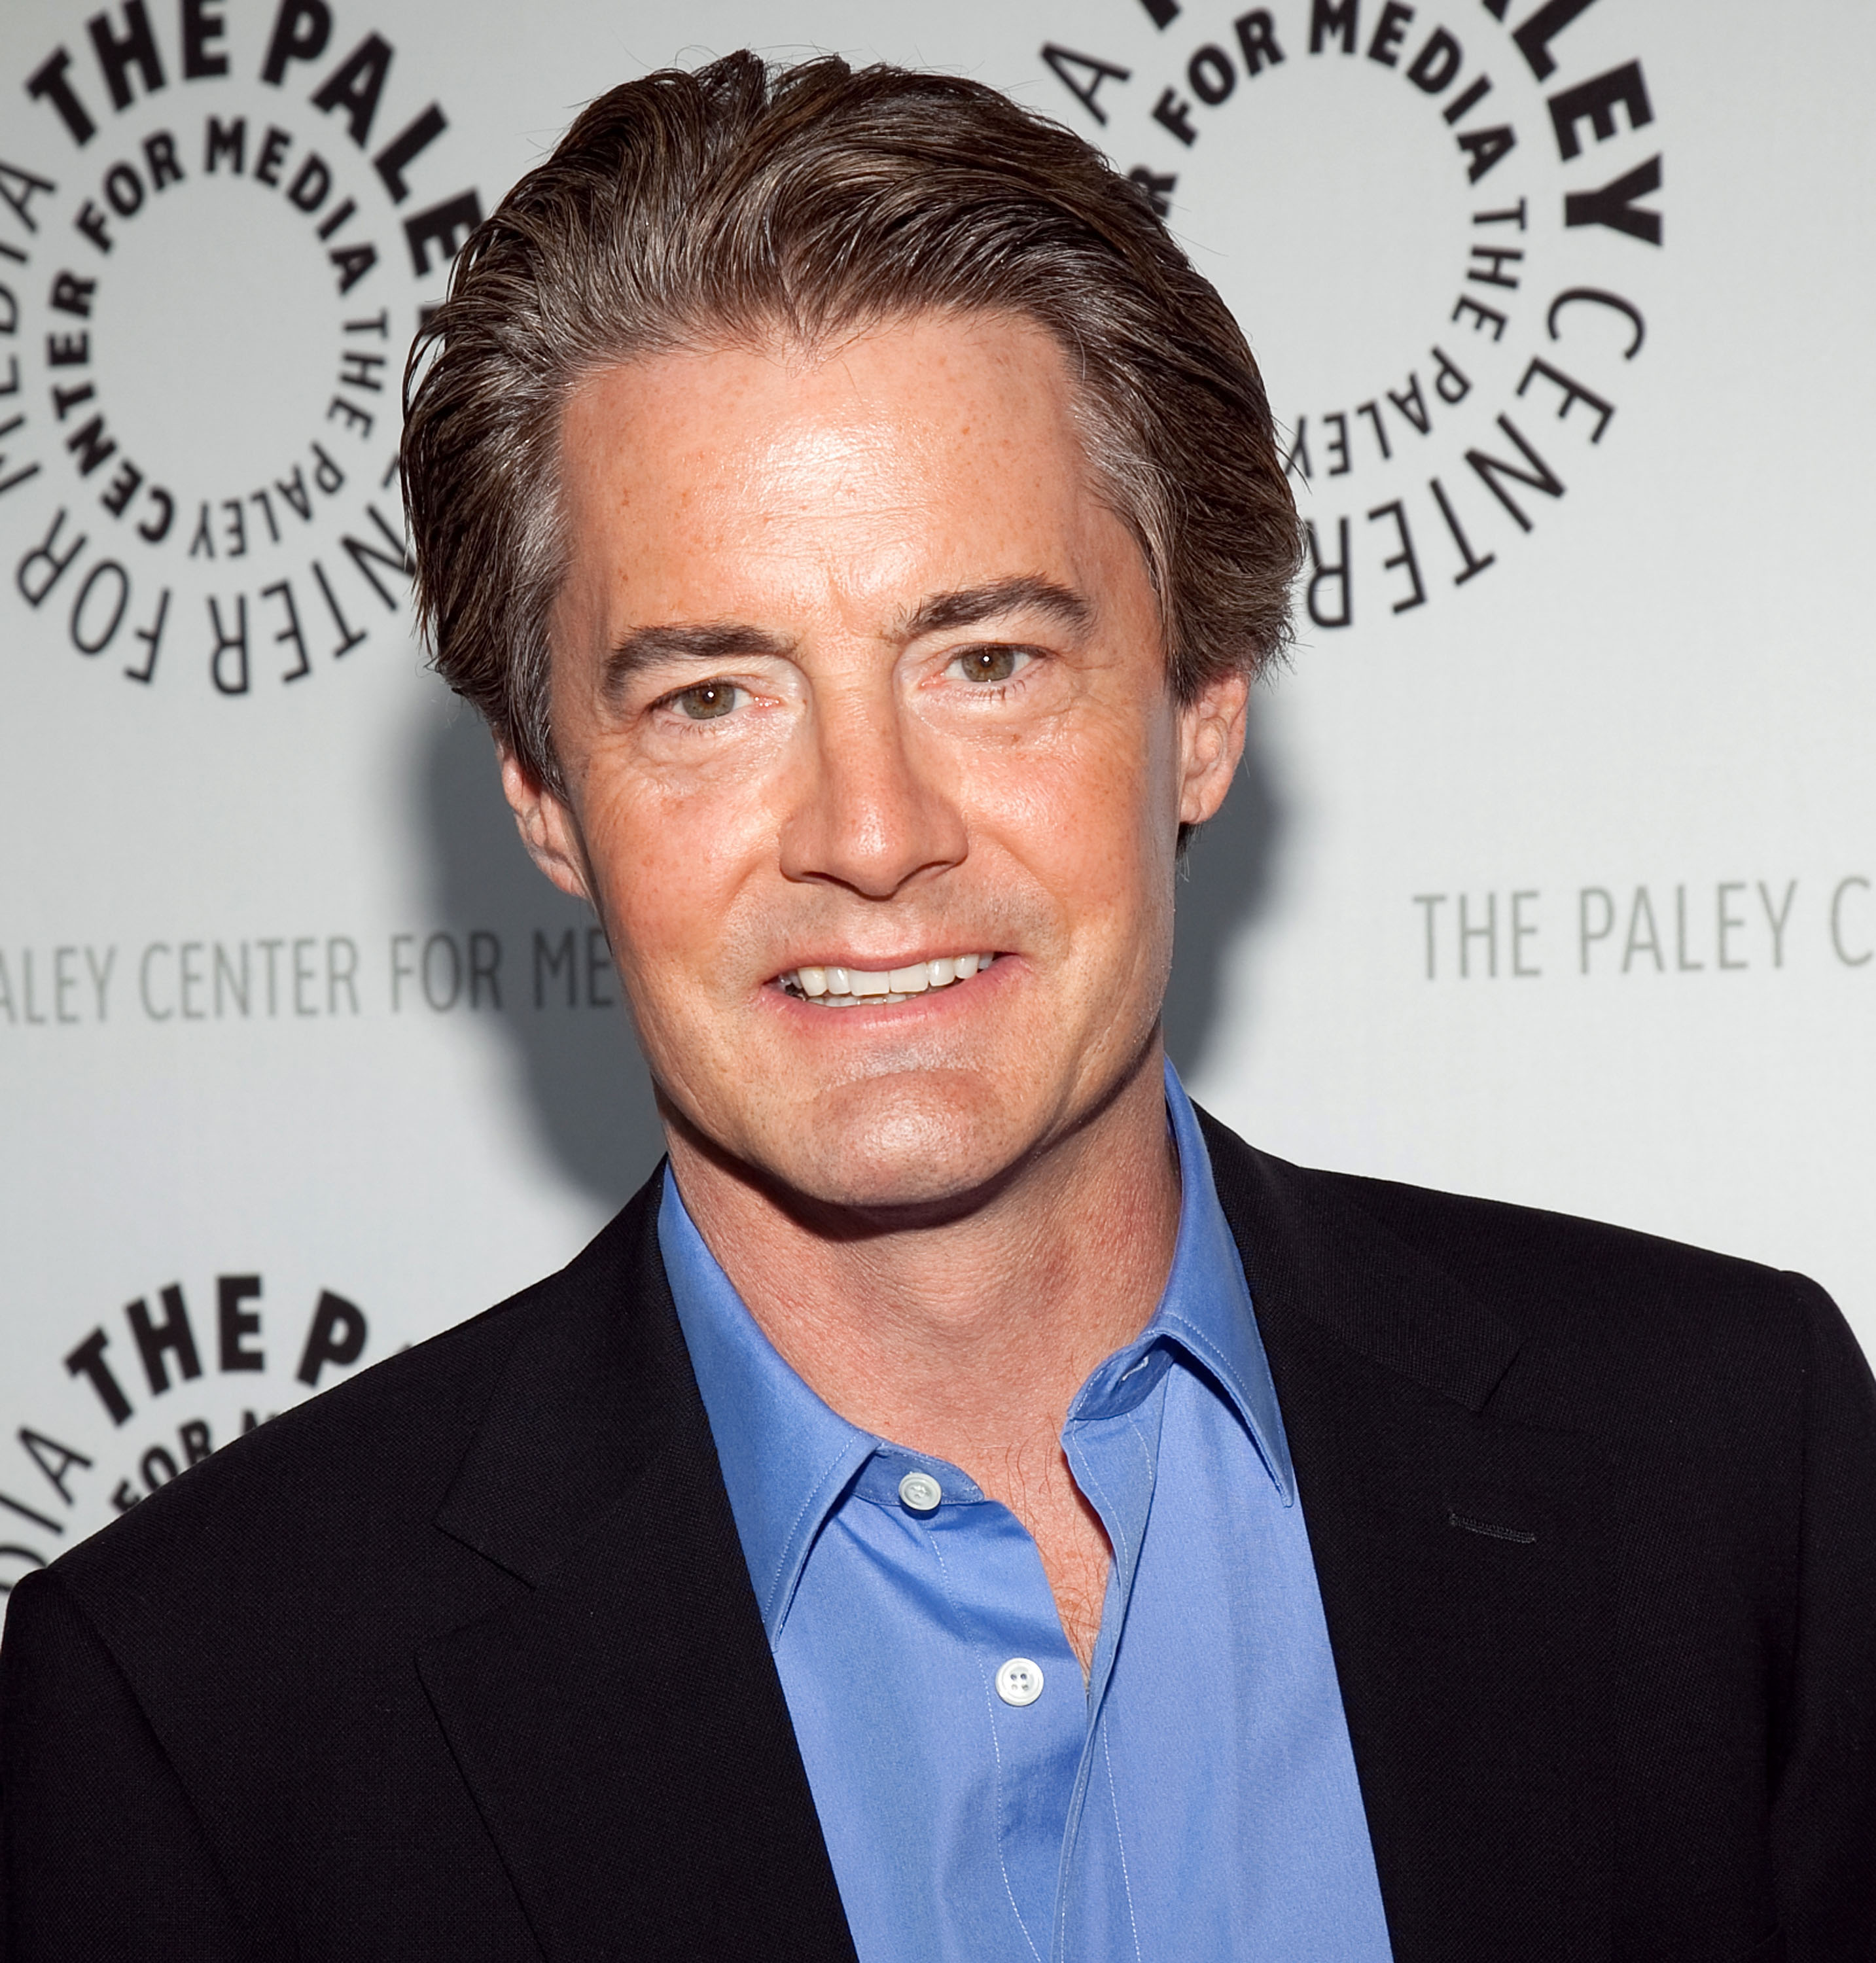 Kyle MacLachlan in 2009. | Source: Getty Images